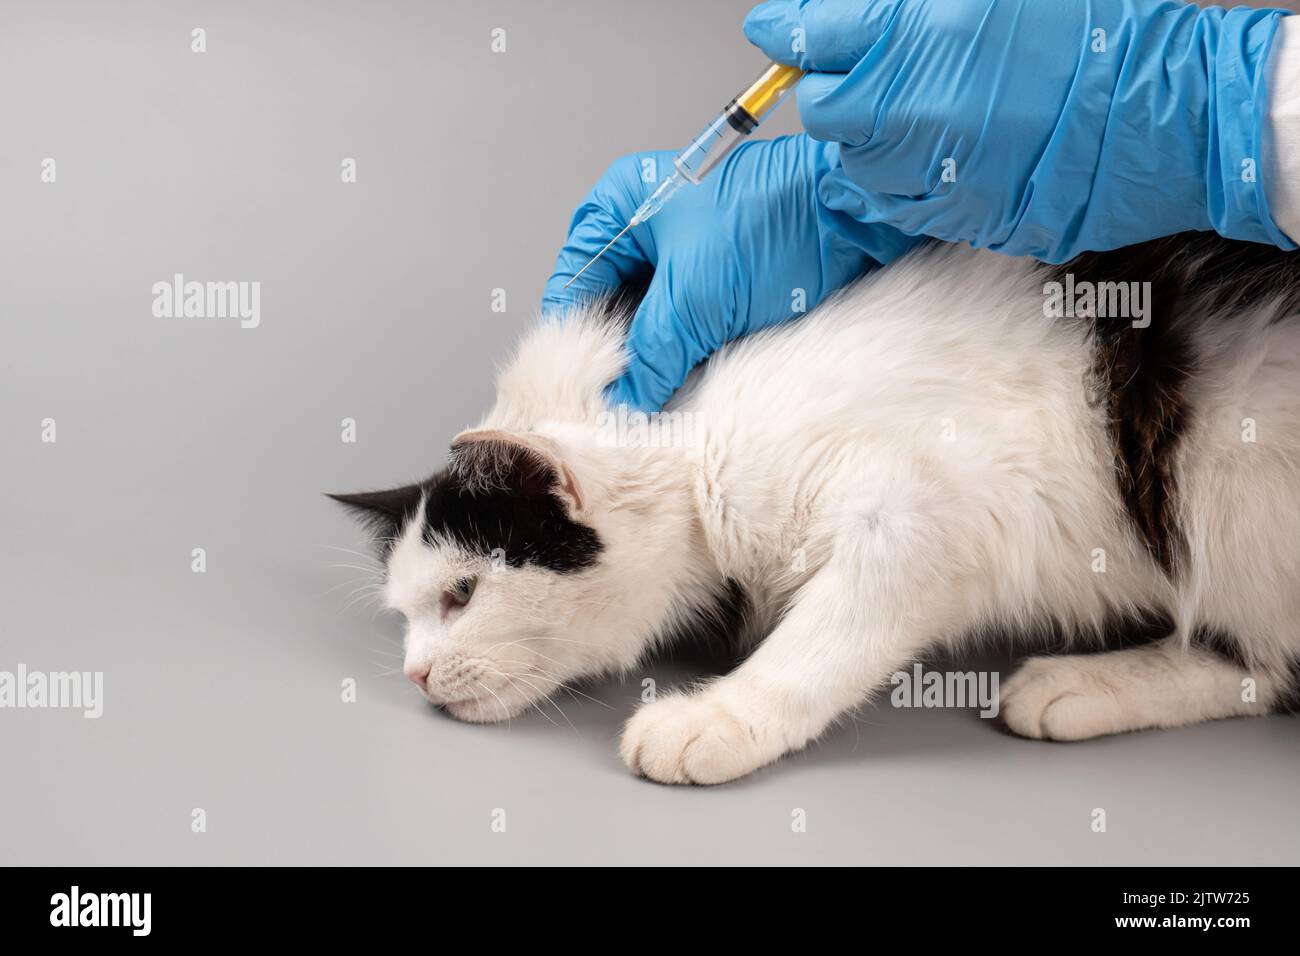 veterinarian doctor hand giving a cat an injection with a syringe. Stock Photo